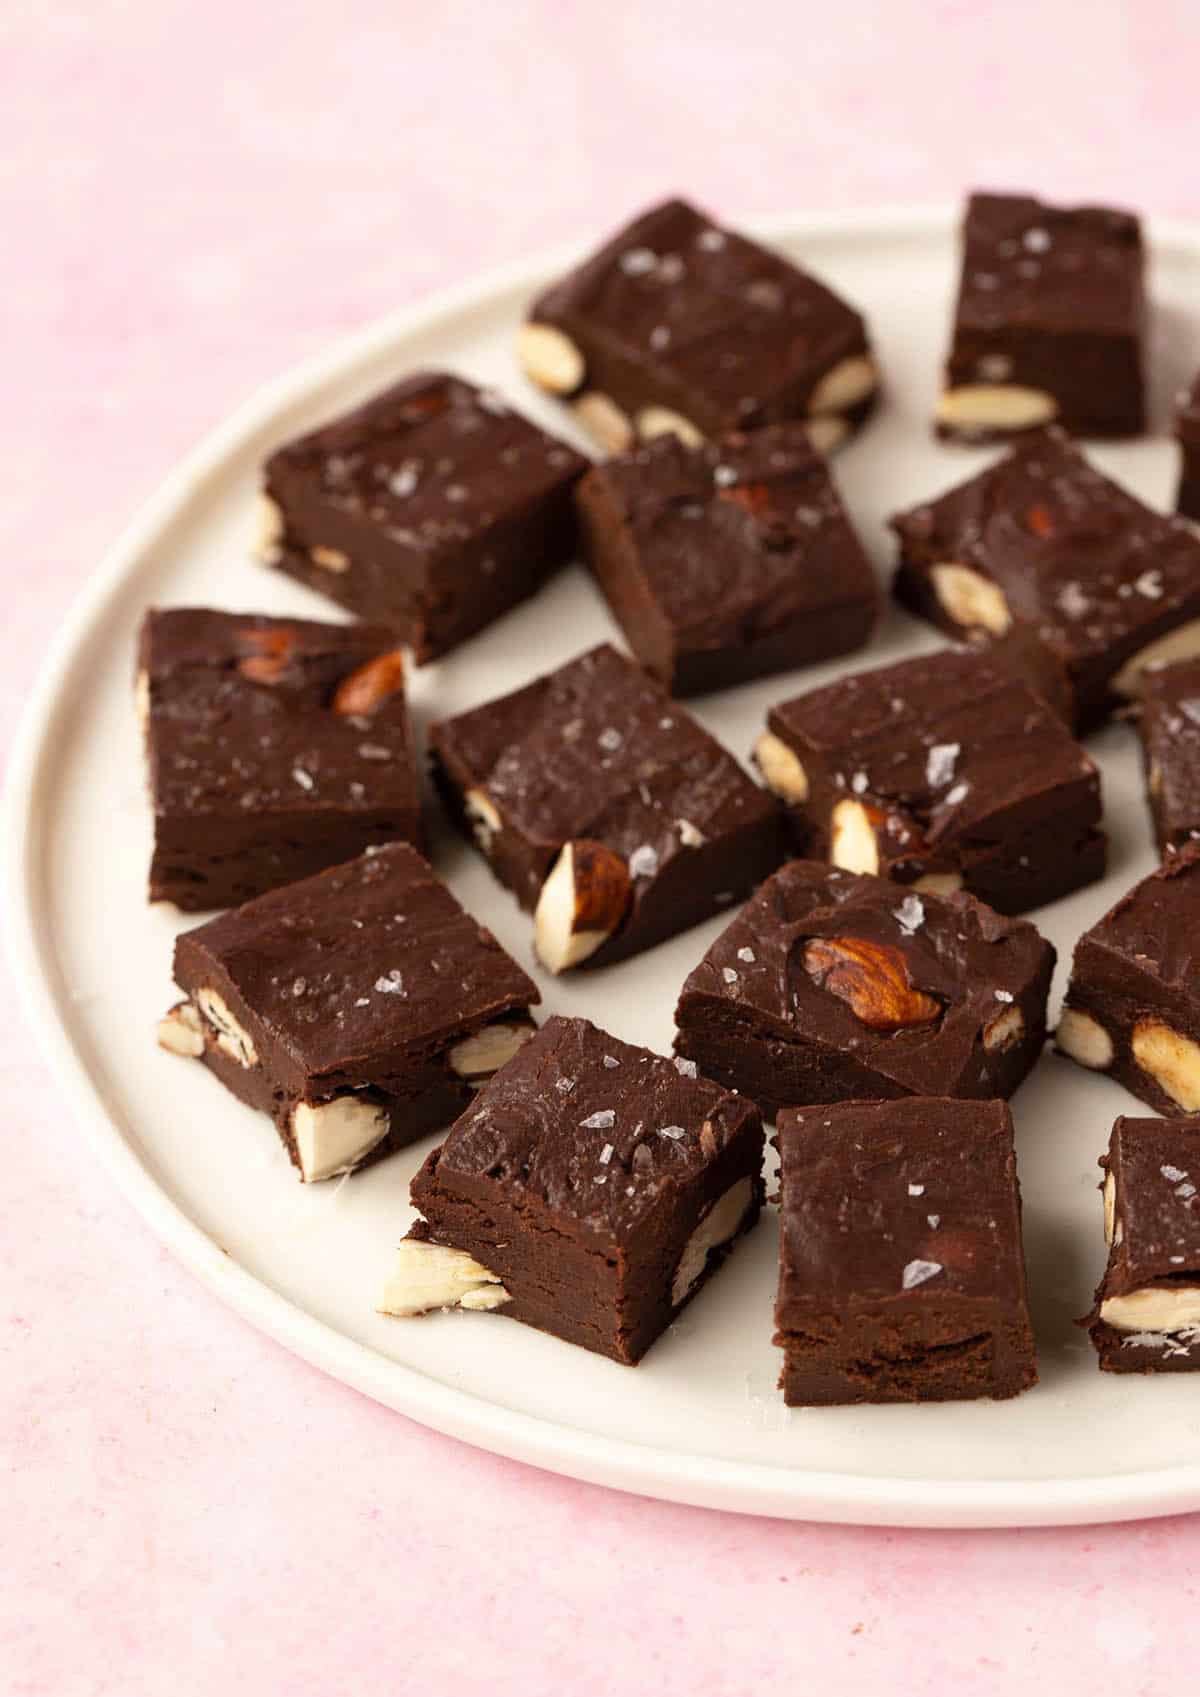 A white plate filled with pieces of Chocolate Almond Fudge on it, ready for serving.